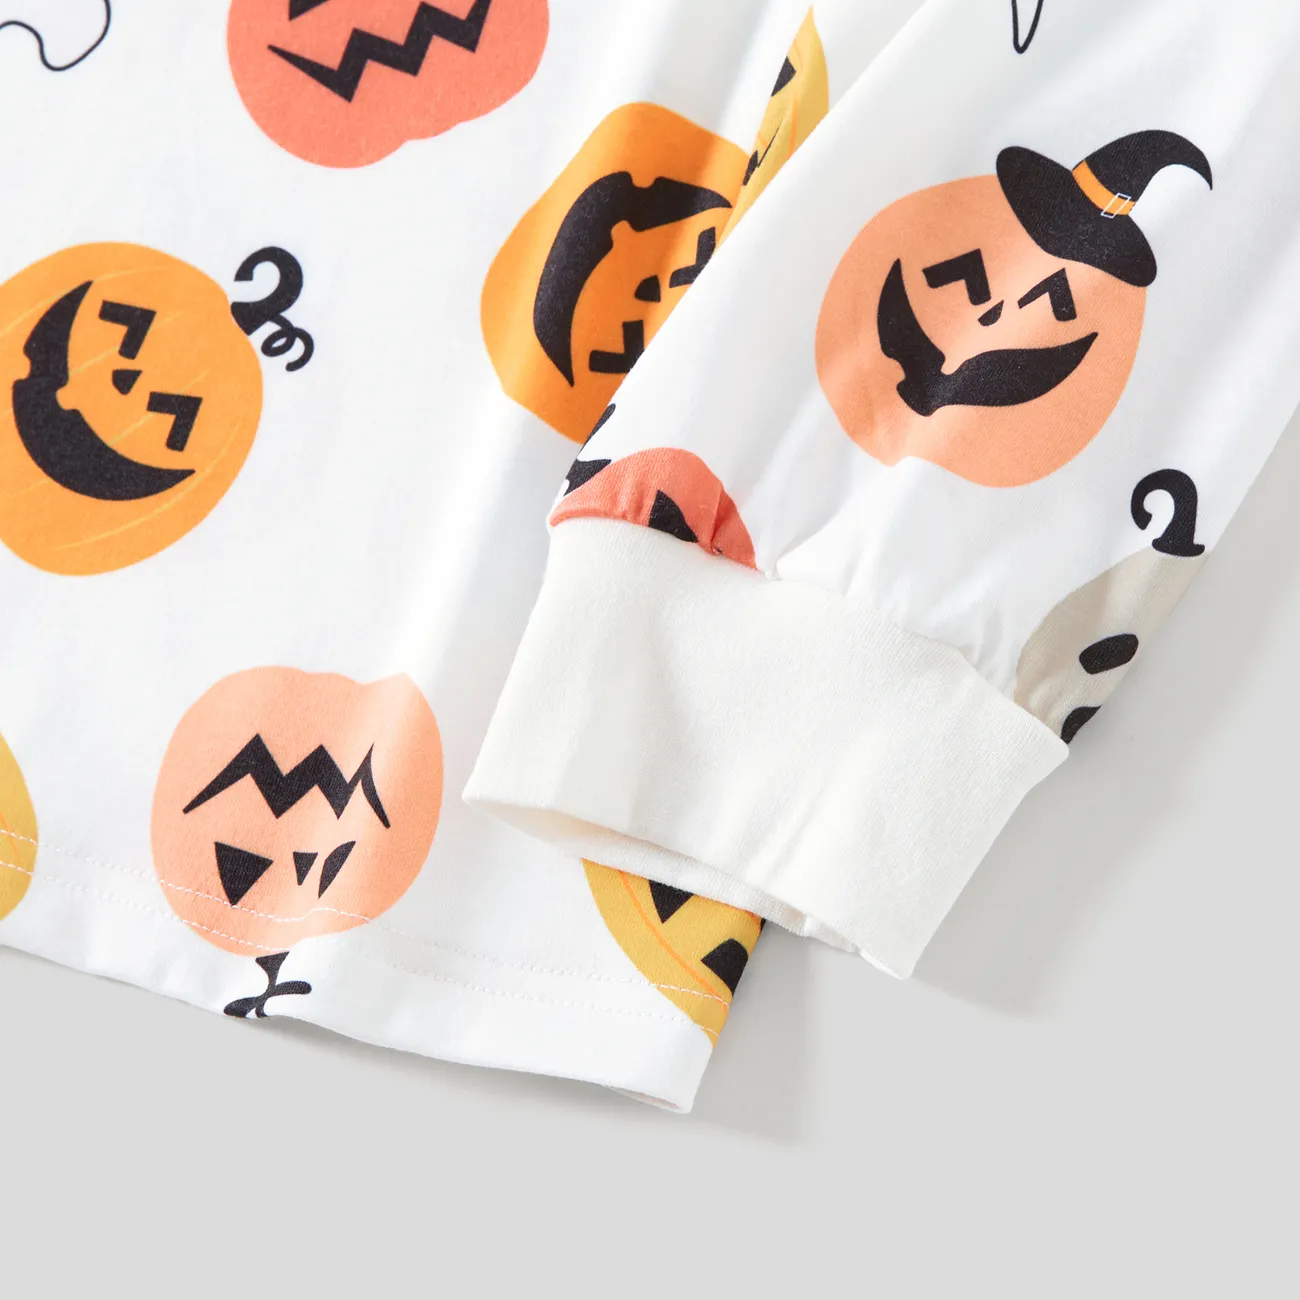 Halloween Family Matching All Over Pumpkin & Ghost Print Pajamas Sets (Flame Resistant) White big image 1